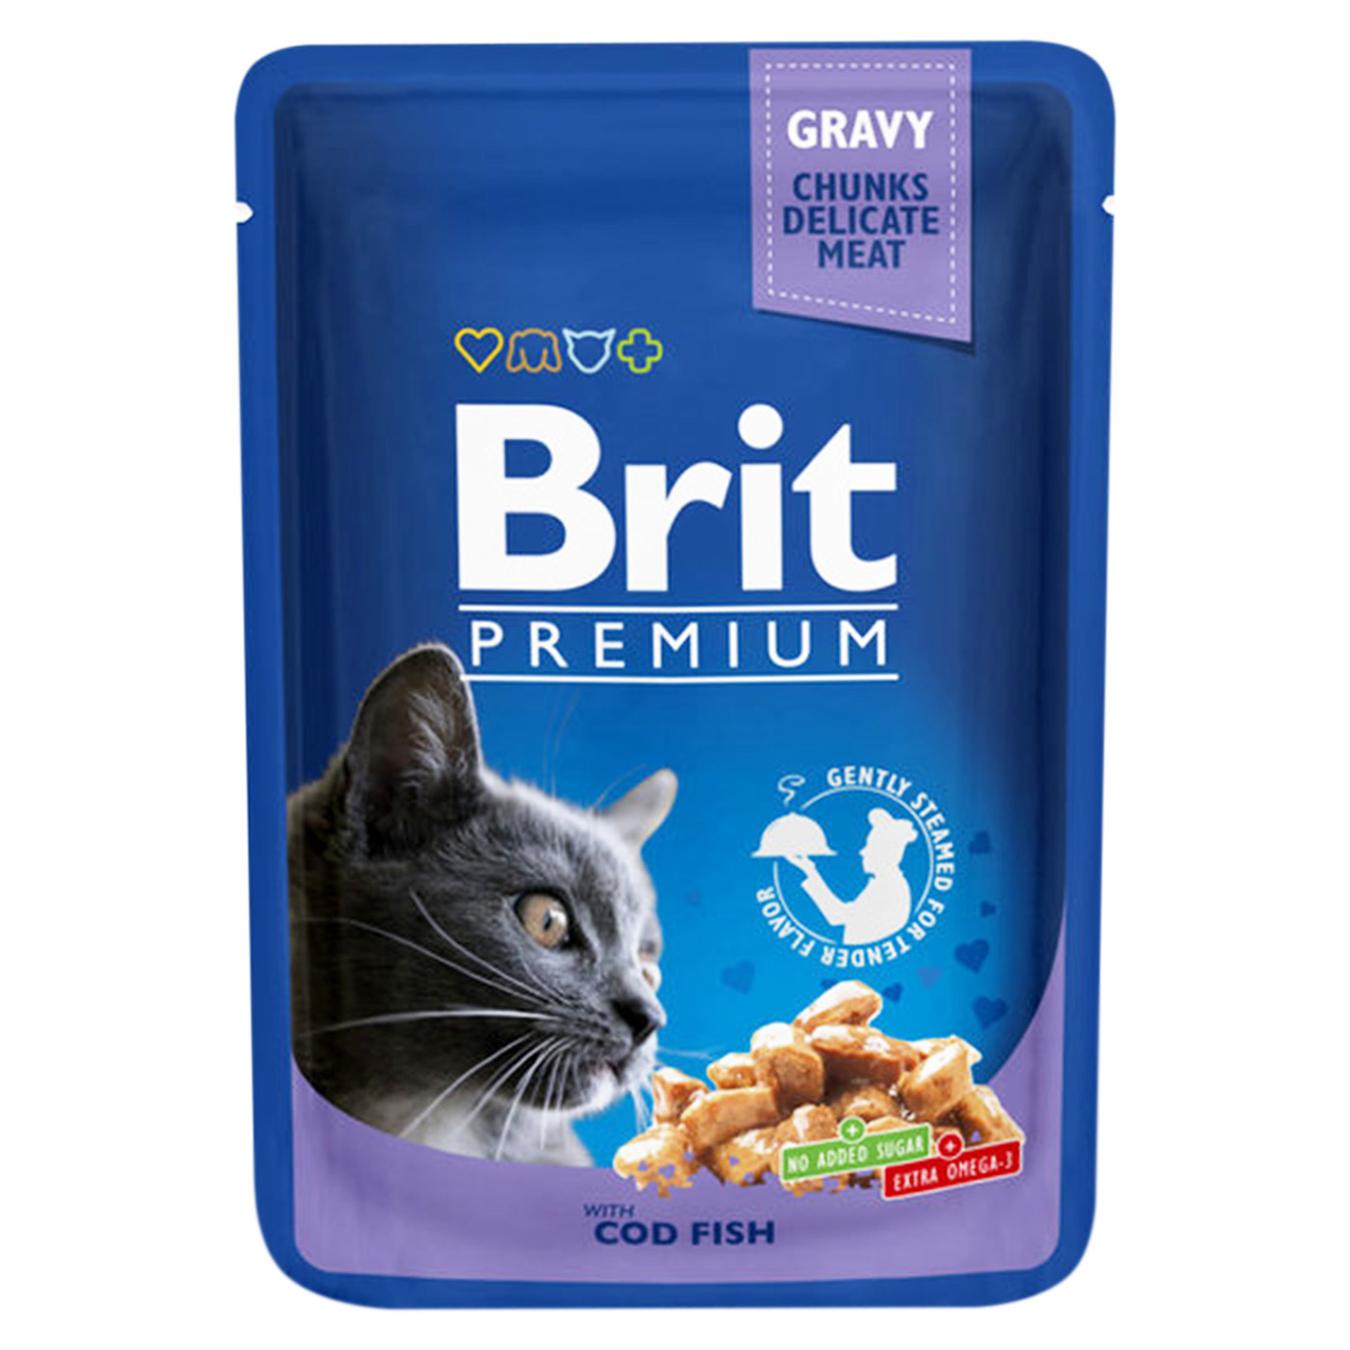 Brit Premium canned food for cats 100g